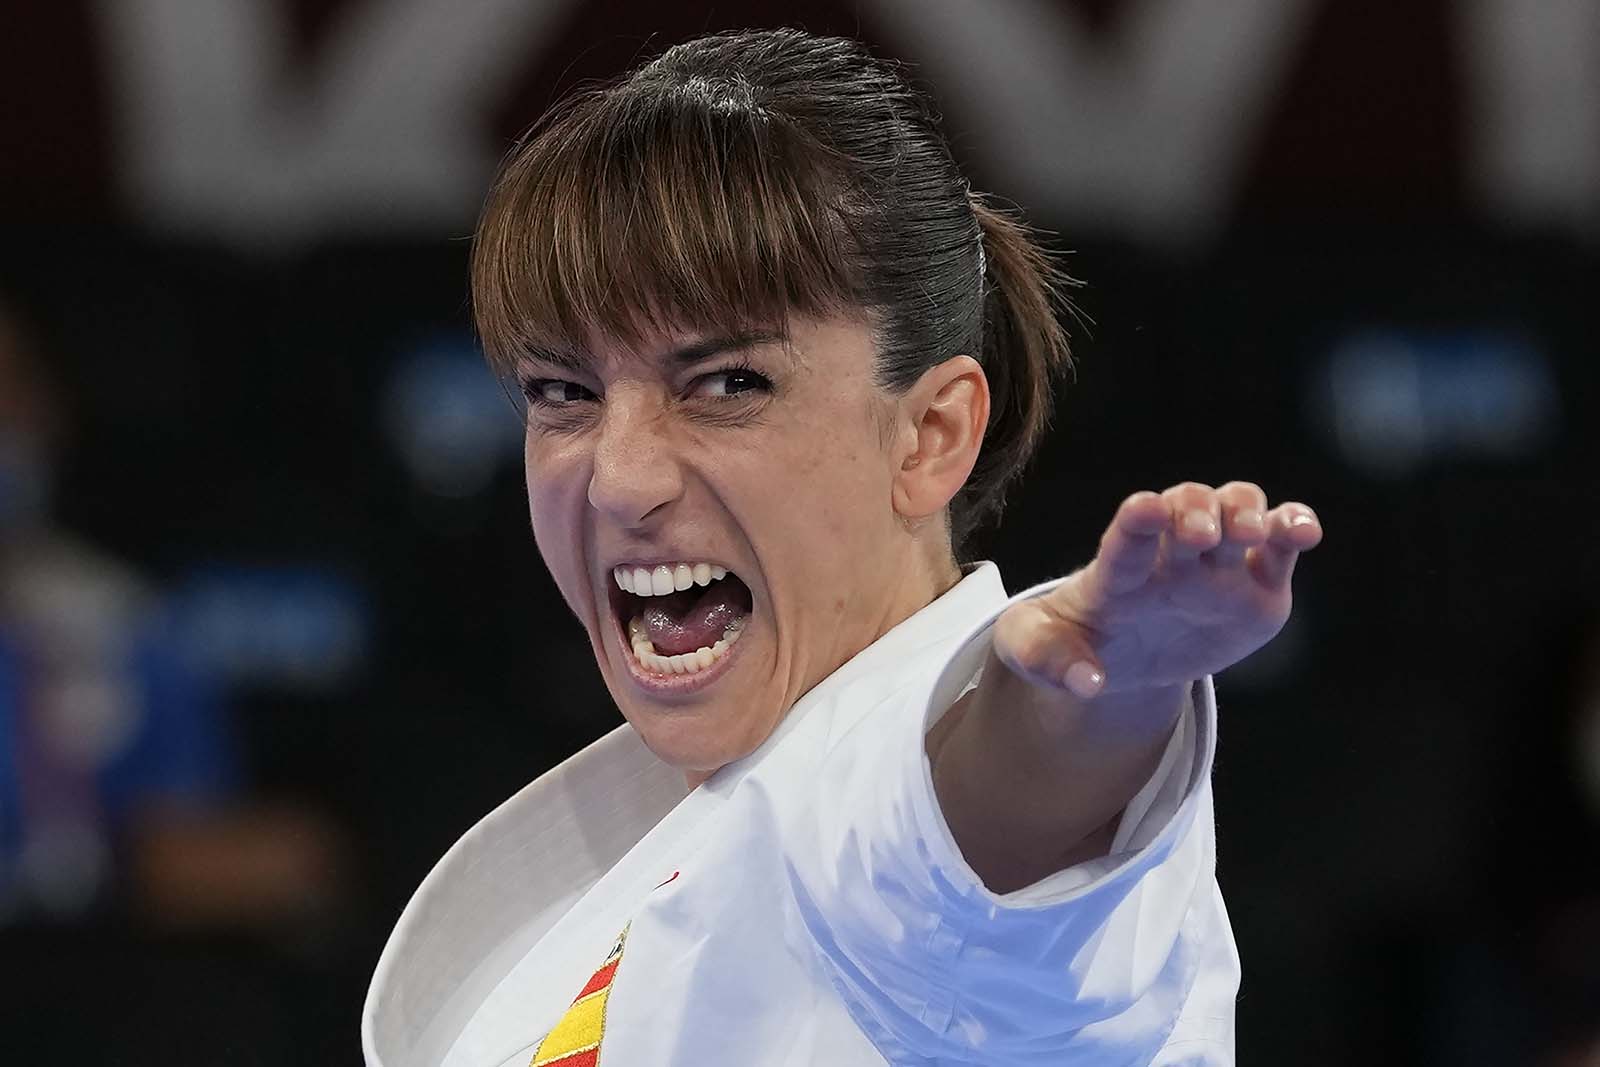 Sandra Sánchez of Spain competes in the ranking round of the women's kata on Thursday.